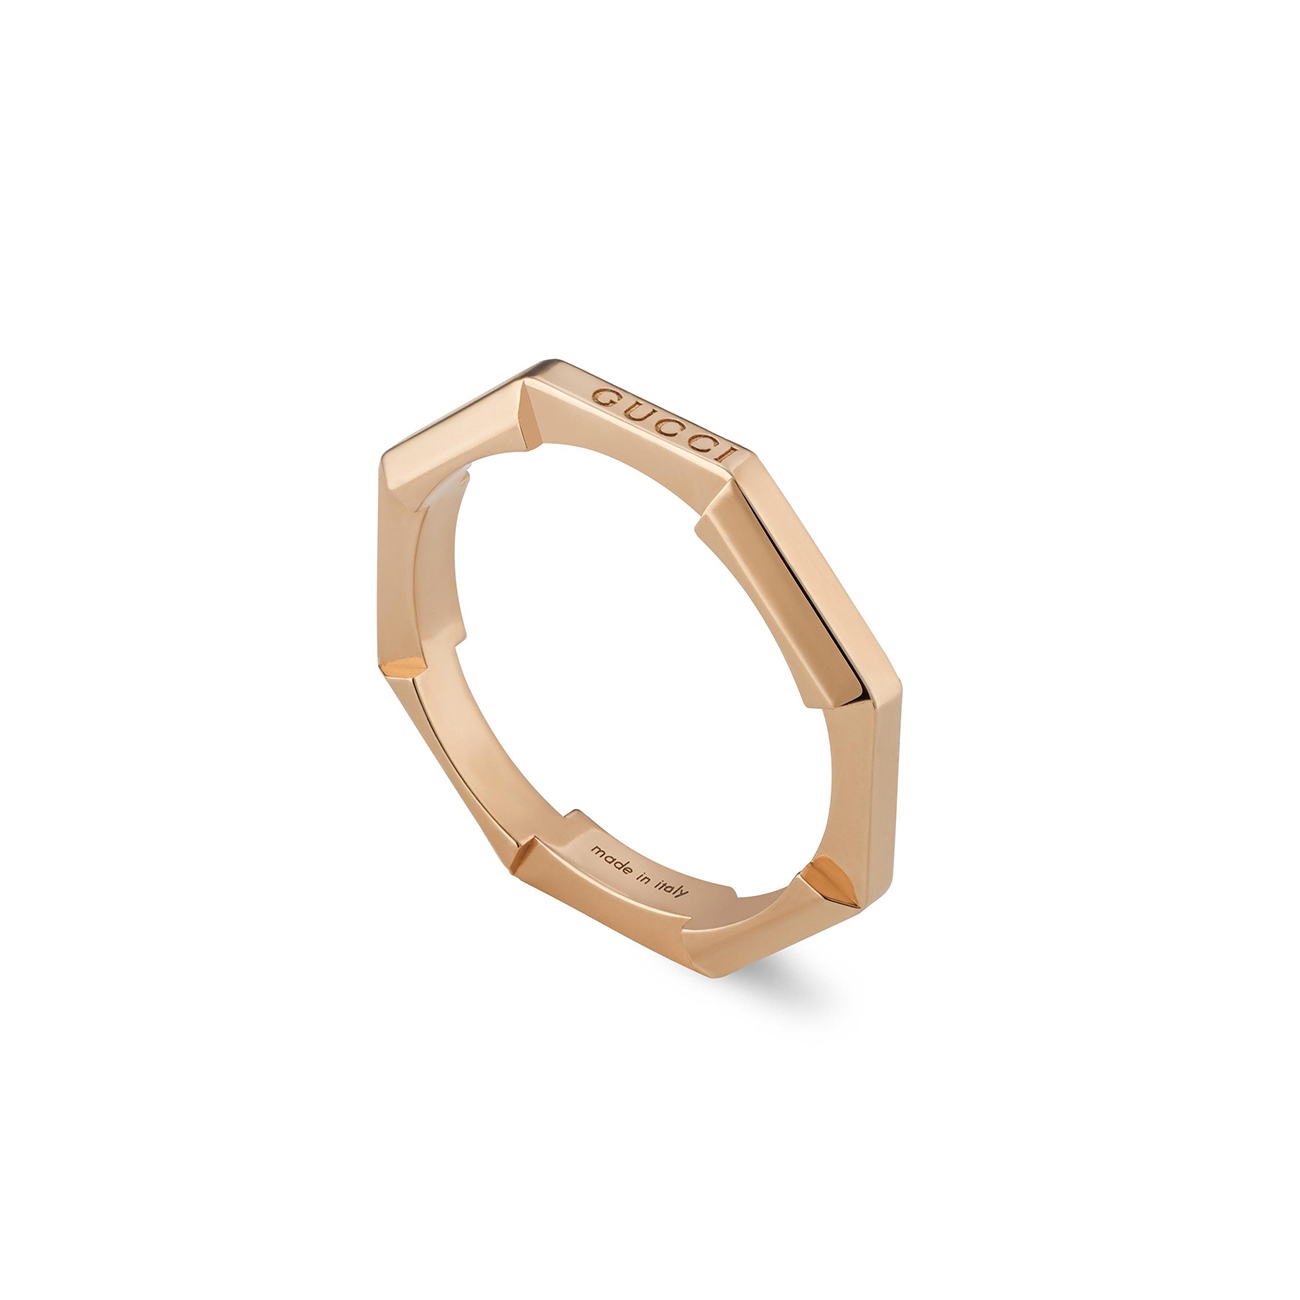 Gucci Link to Love ring in 18k Rose Gold